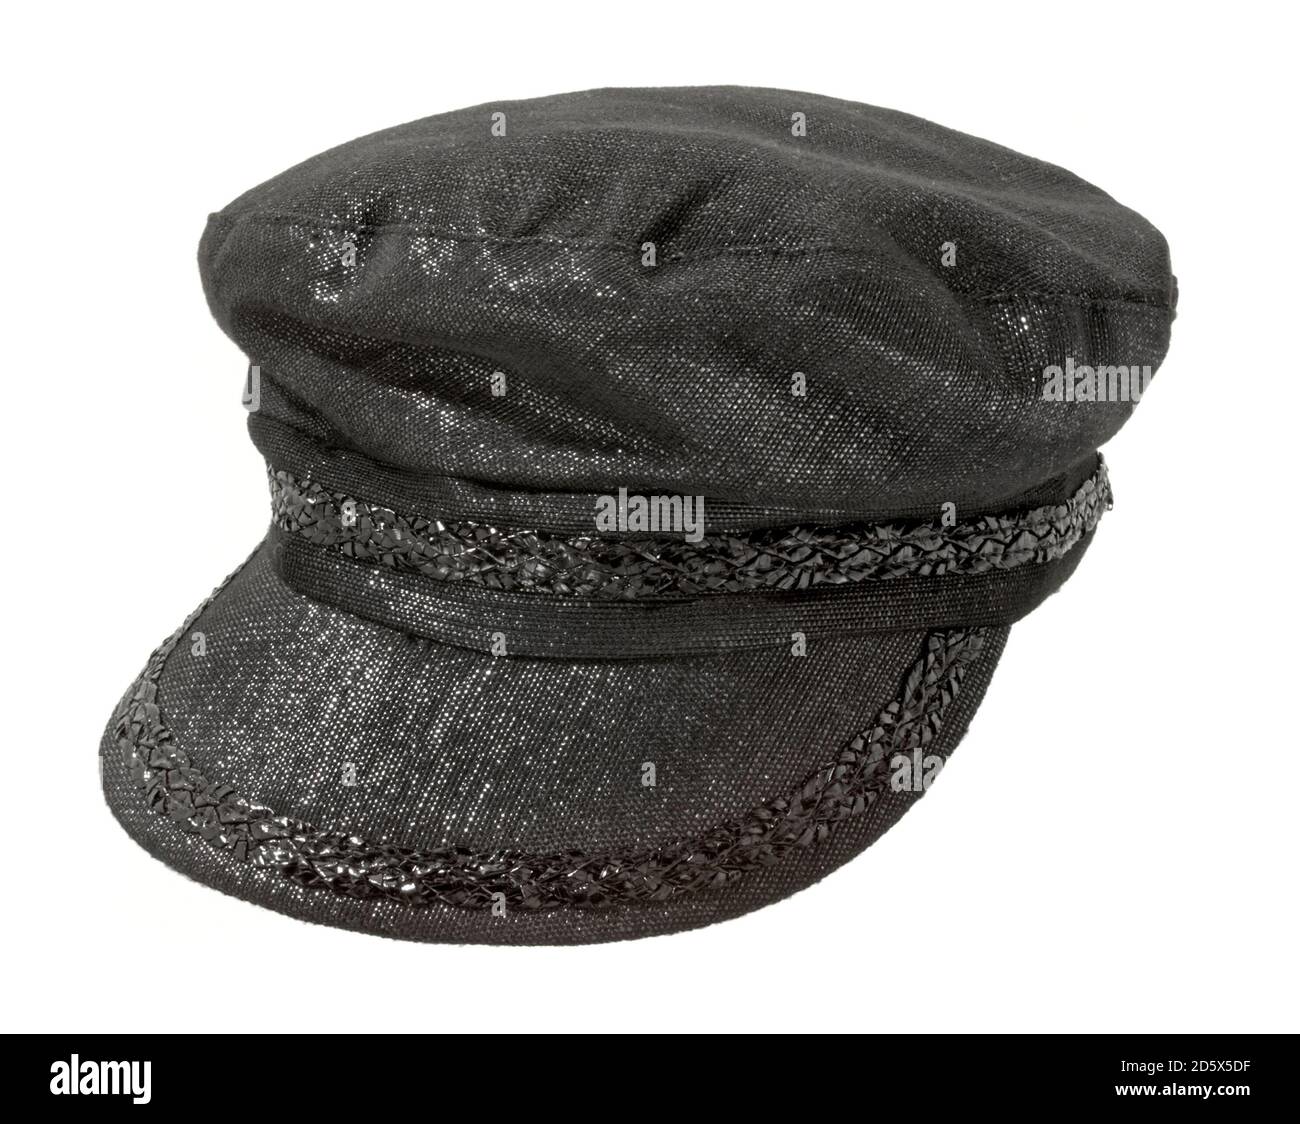 Vintage style conductor hat by Lola in shiny black photographed on a white background . Stock Photo